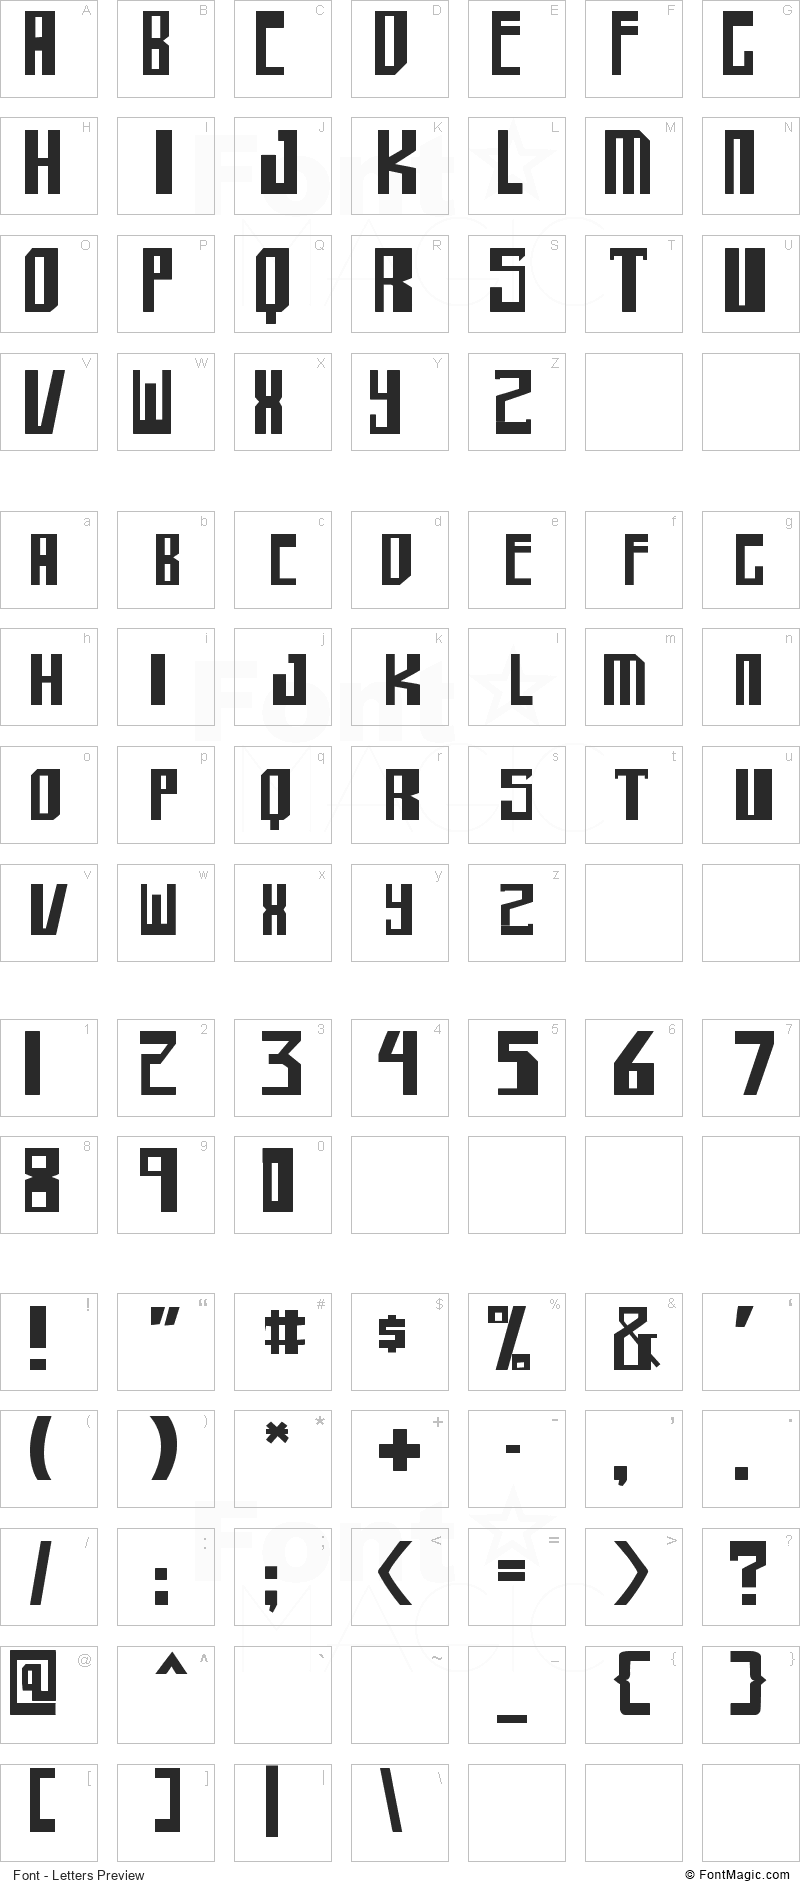 Shellhead 2 Font - All Latters Preview Chart